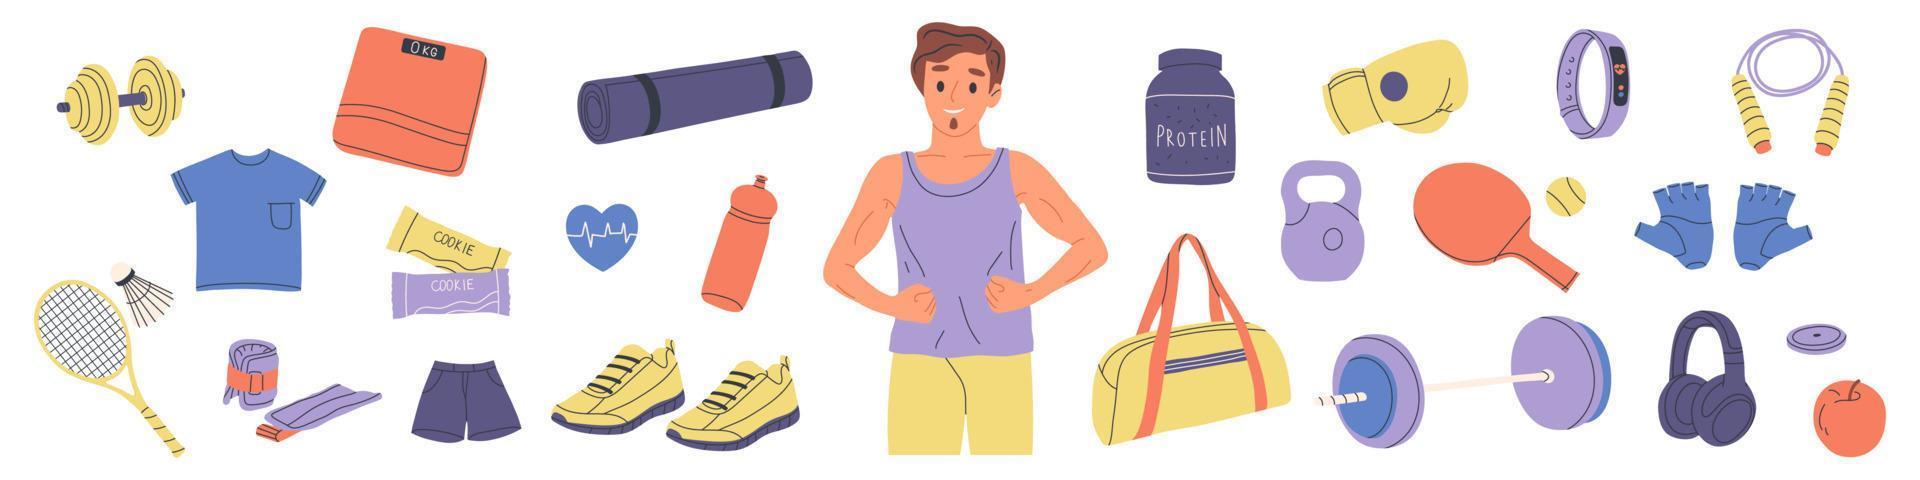 Young guy and items for sports. Kettlebell, gym bag, barbell, racket. Workout stuff bundle. Isolated flat vector illustration.